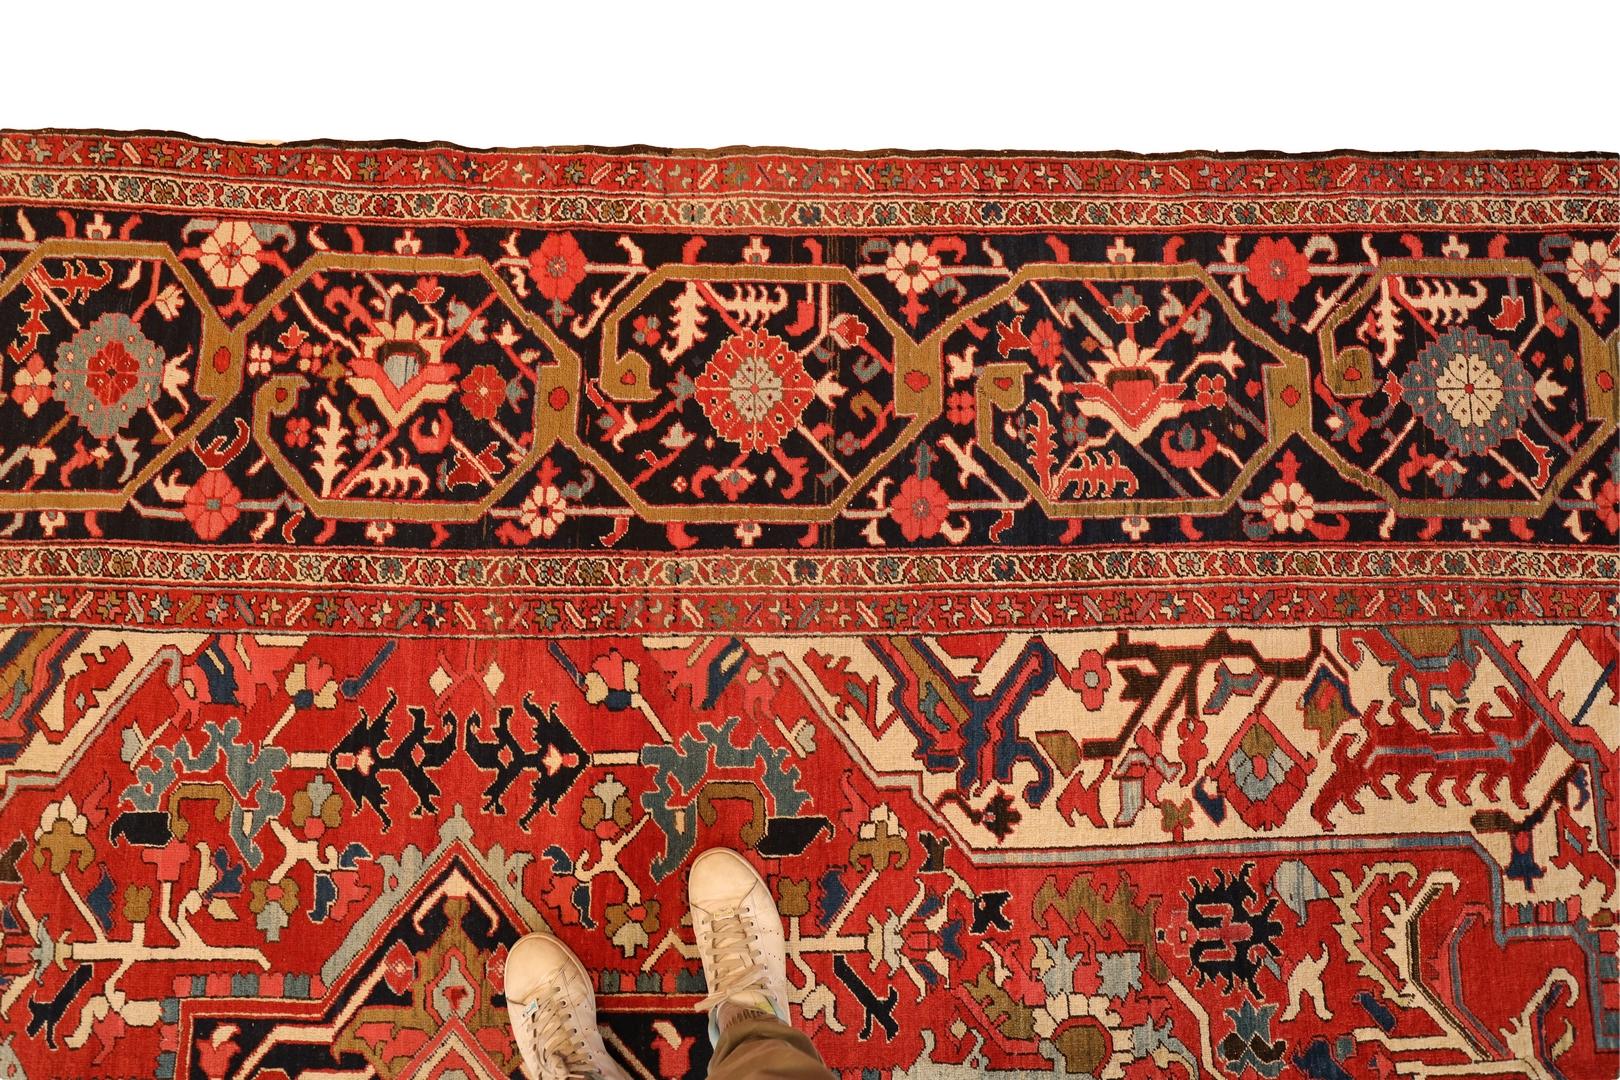 Heriz Antique Room Size, Red Ivory Green - 13'6